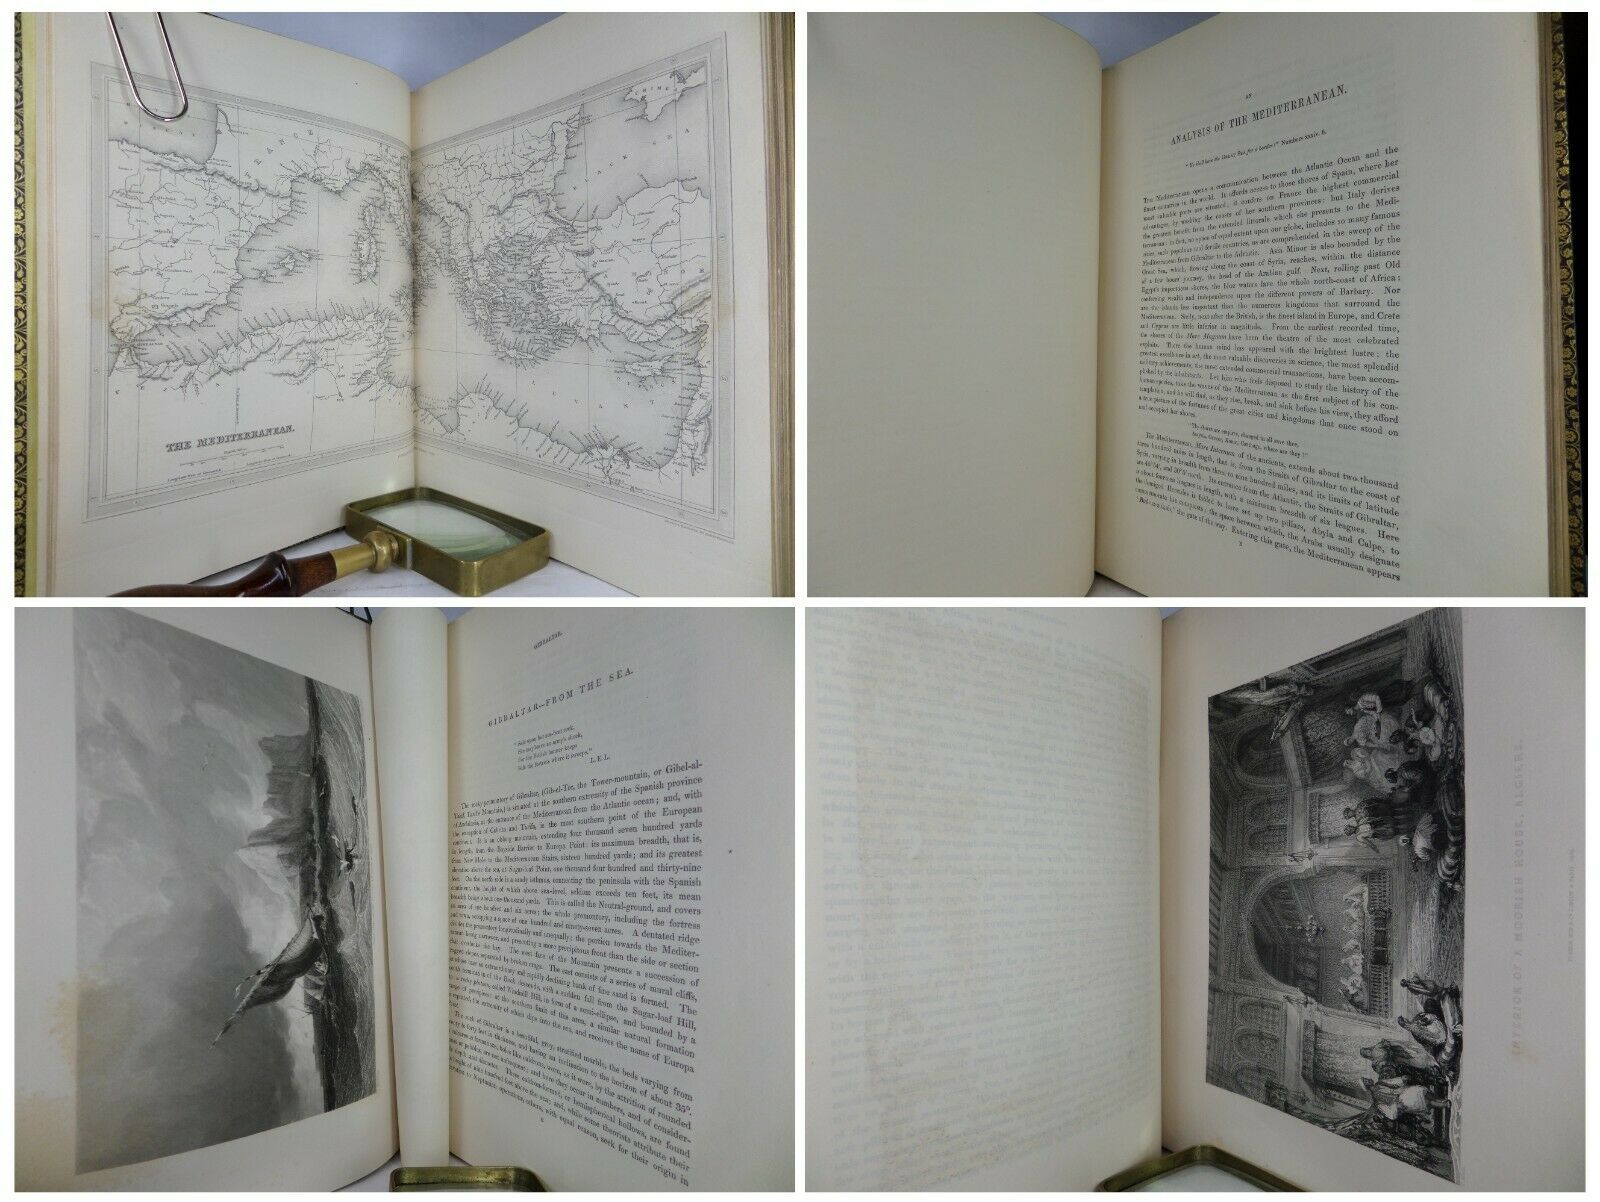 THE SHORES AND ISLANDS OF THE MEDITERRANEAN BY G.N. WRIGHT, FINE LEATHER BINDING